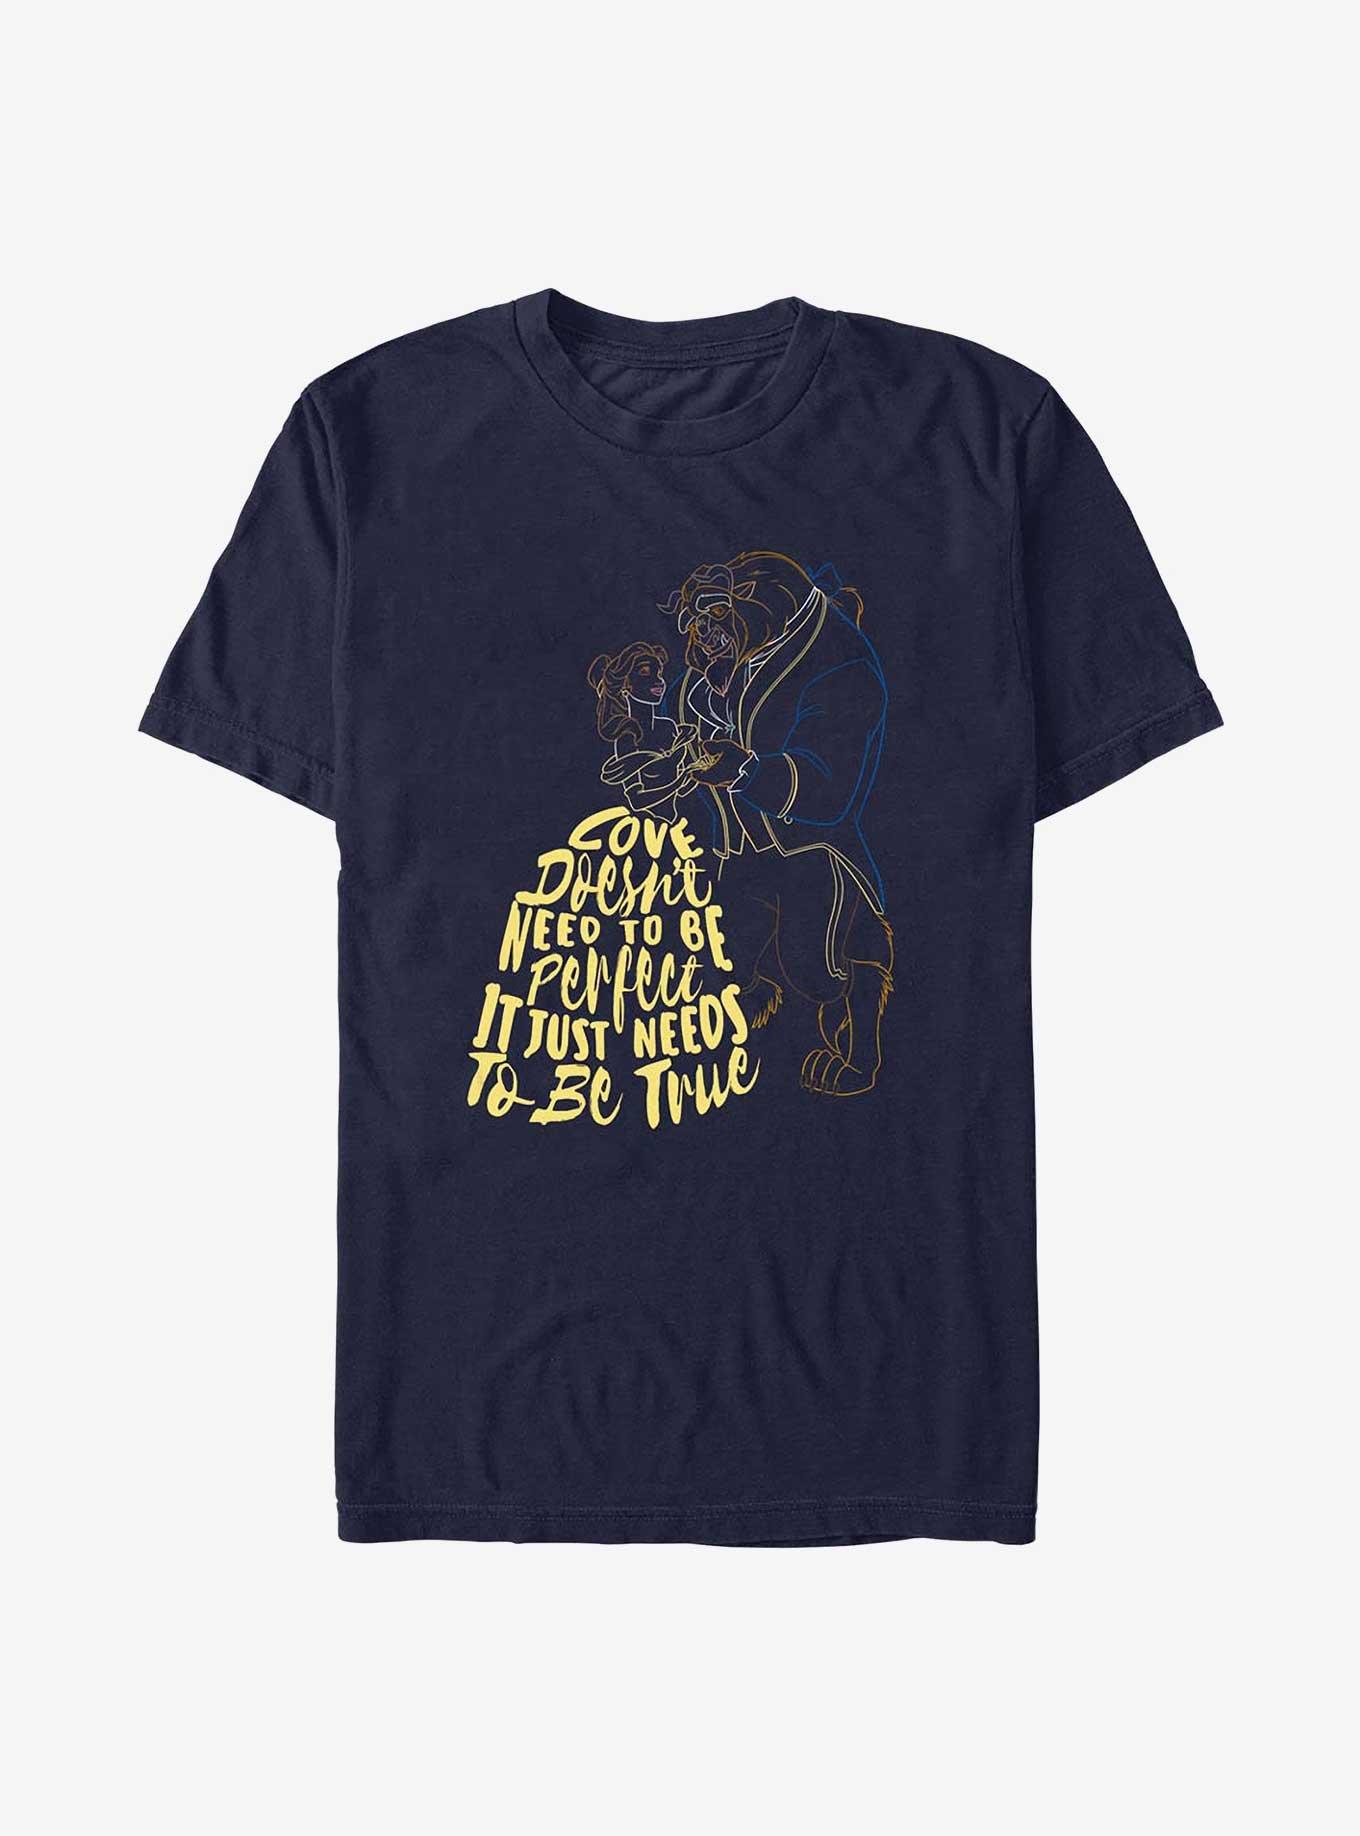 Disney Beauty and the Beast Love Needs Time T-Shirt, NAVY, hi-res